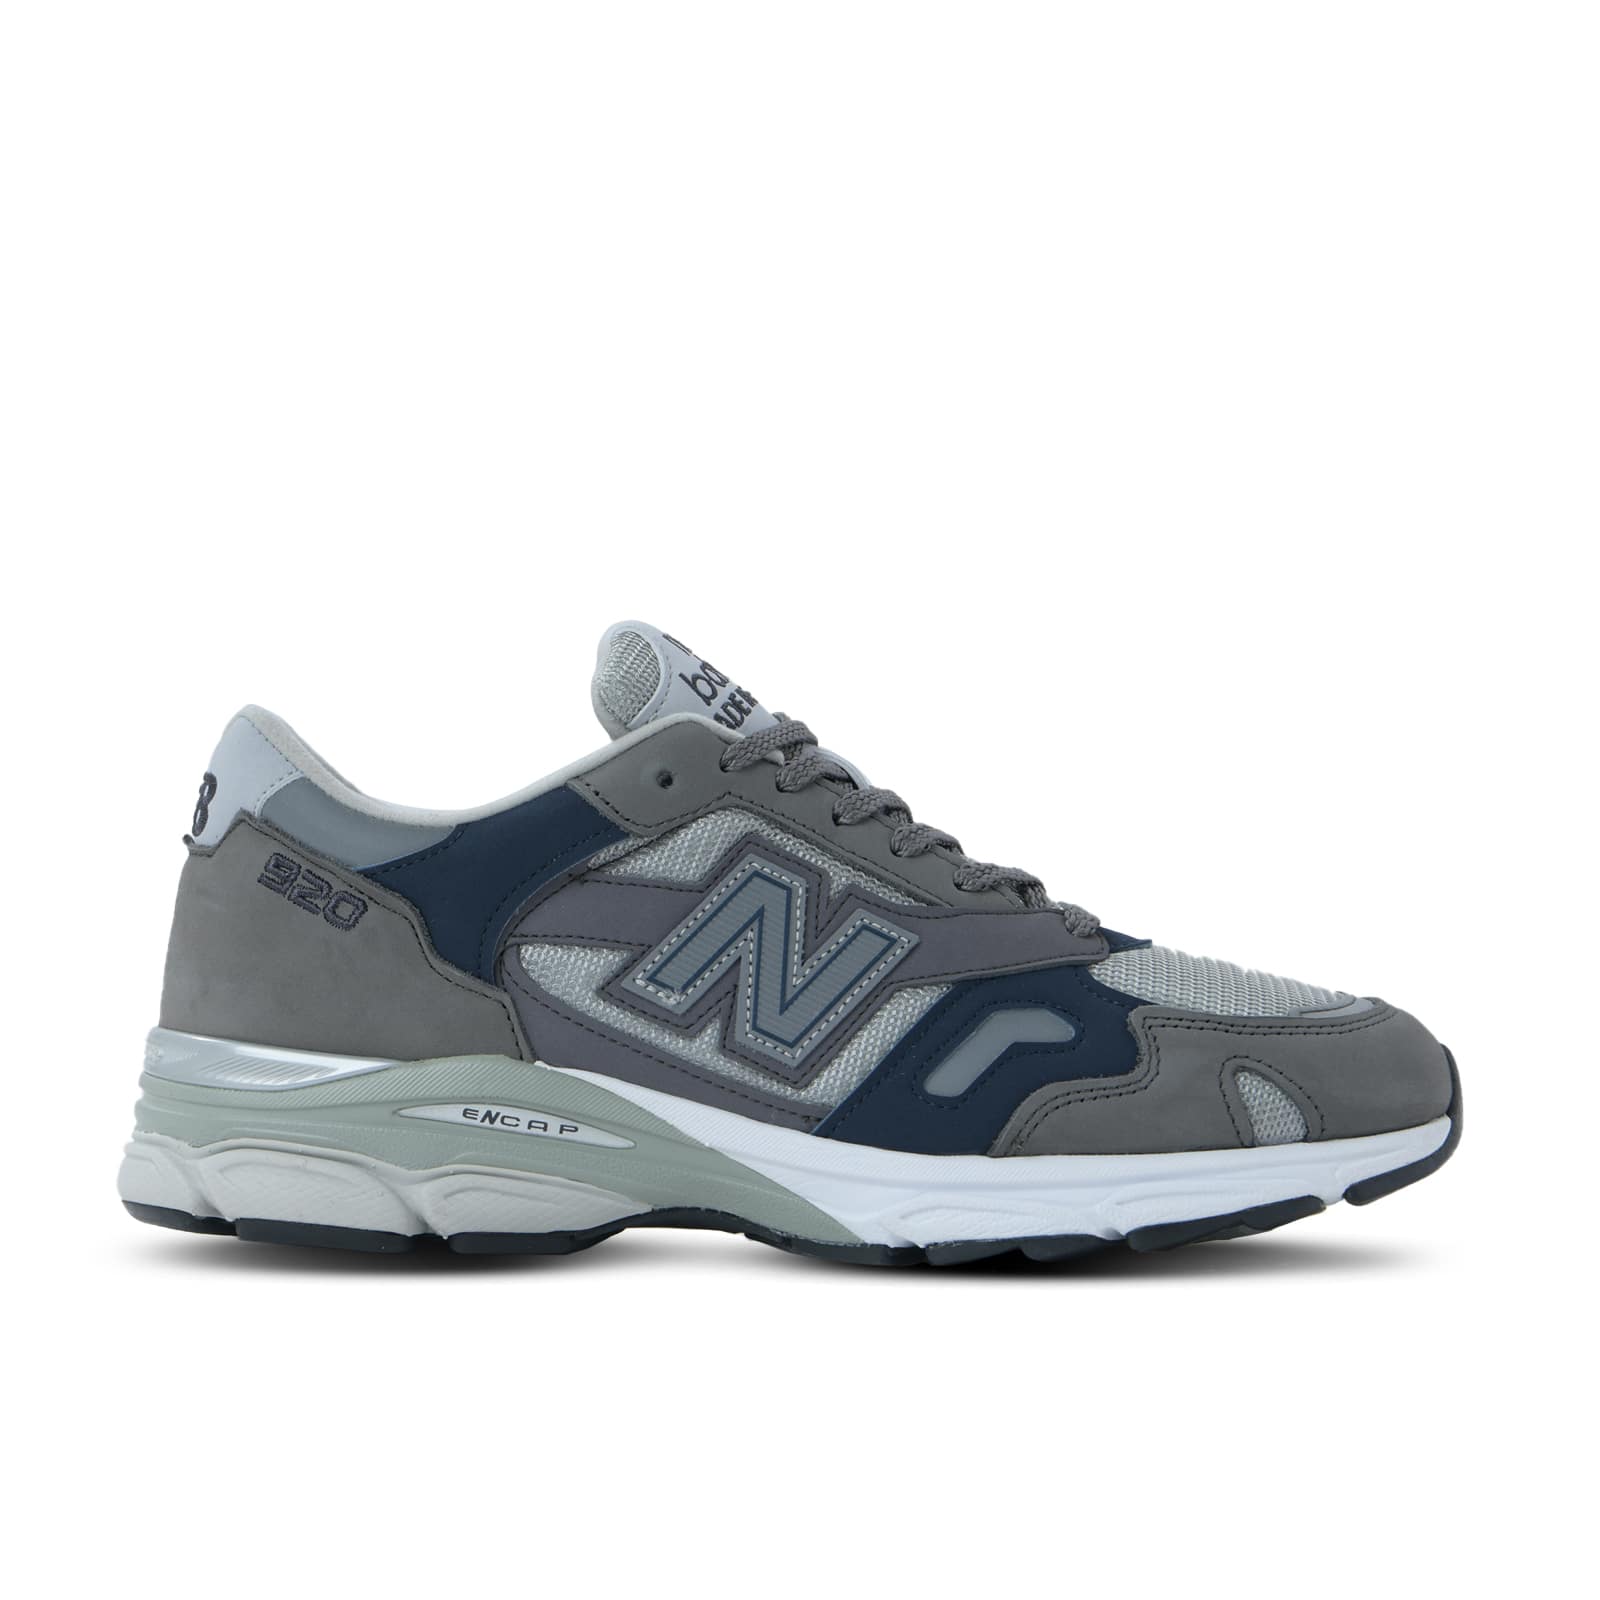 New Balance / ニューバランスM920 GNS made in UK990